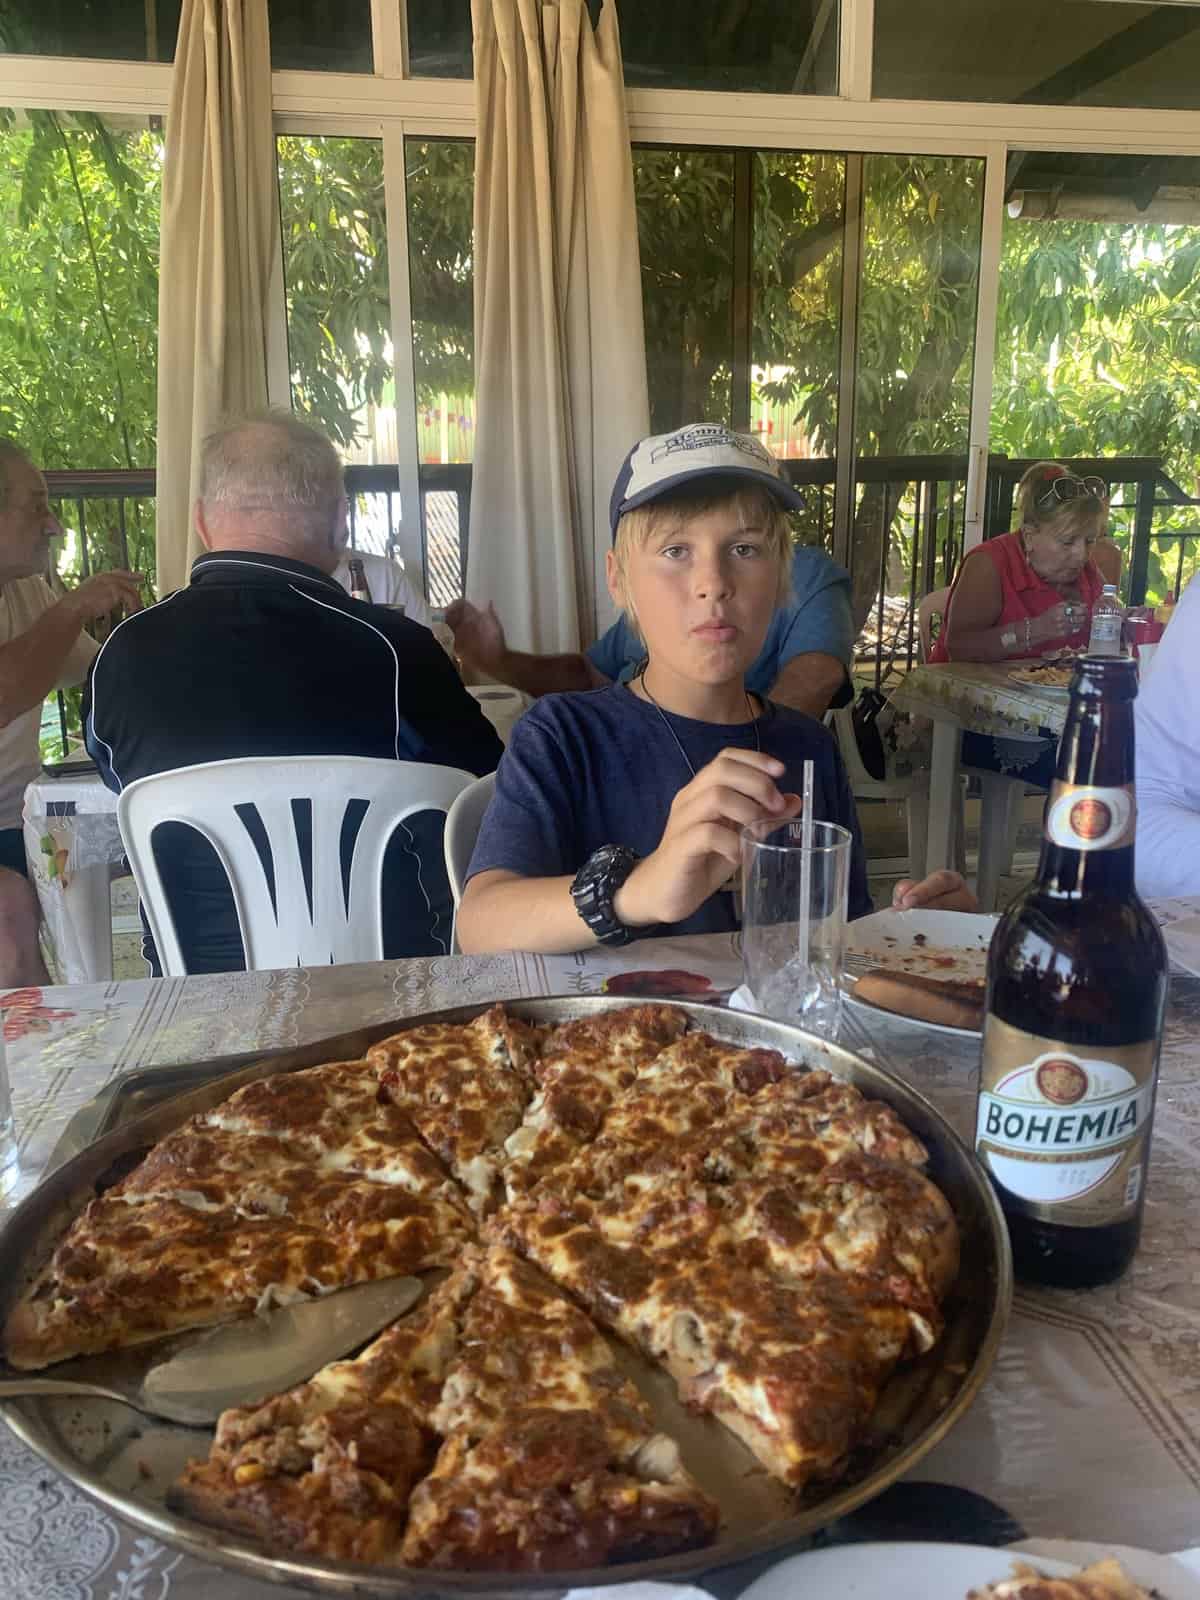 large pizza and a local beer, to celebrate Pascha in the Dominican Republic. 